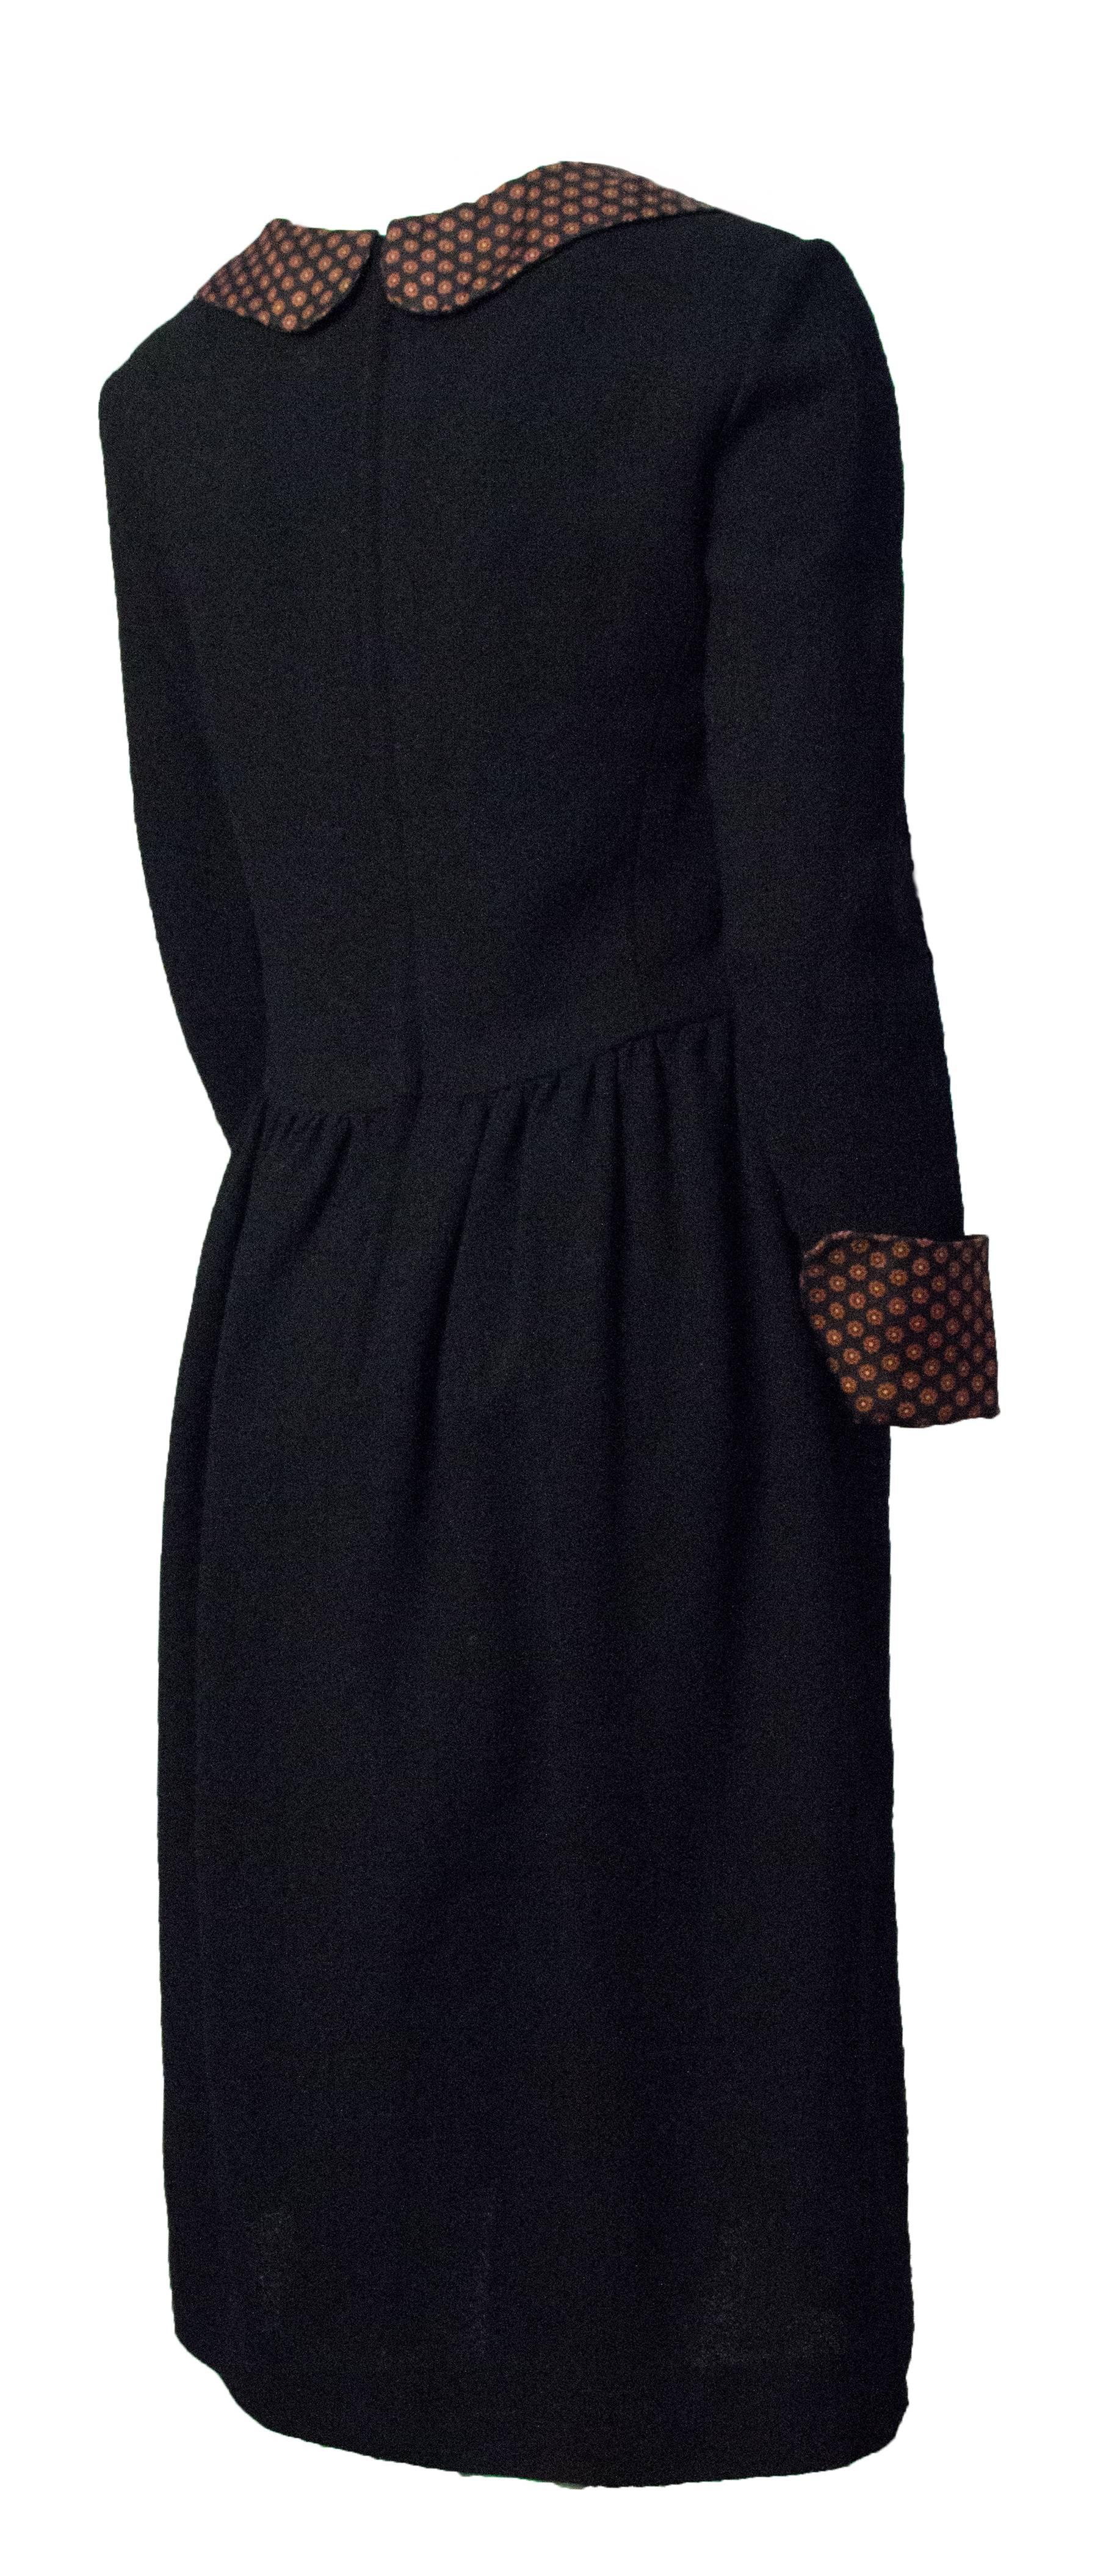 60s Mary Quant medium weight black wool blend dress. Mini floral printed silk cuffs and peter pan collar. Metal zipper up the back. Fully lined. 

 